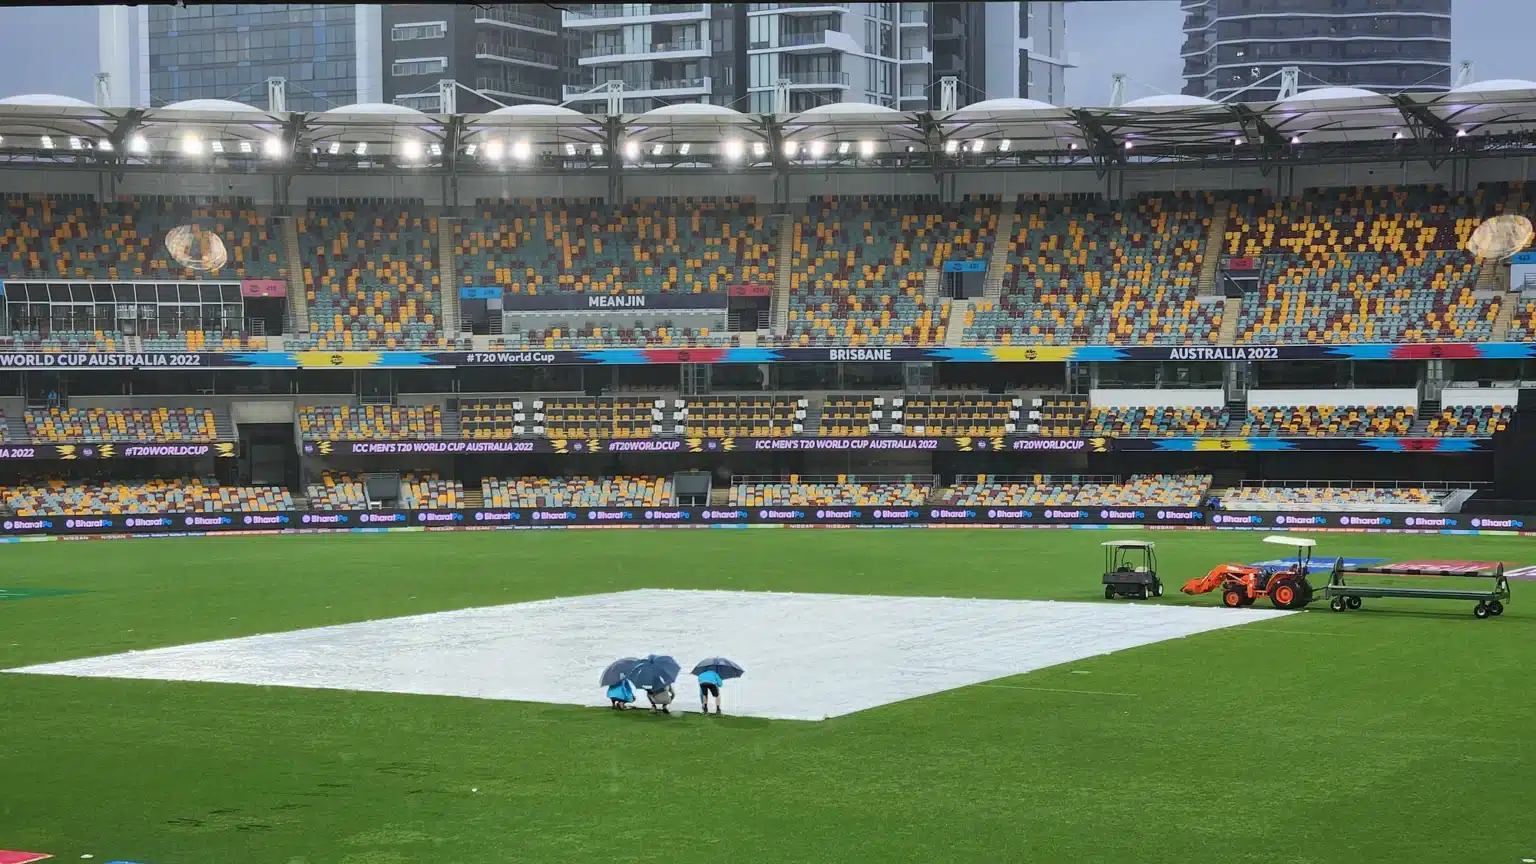 Why is it raining so much in Australia?